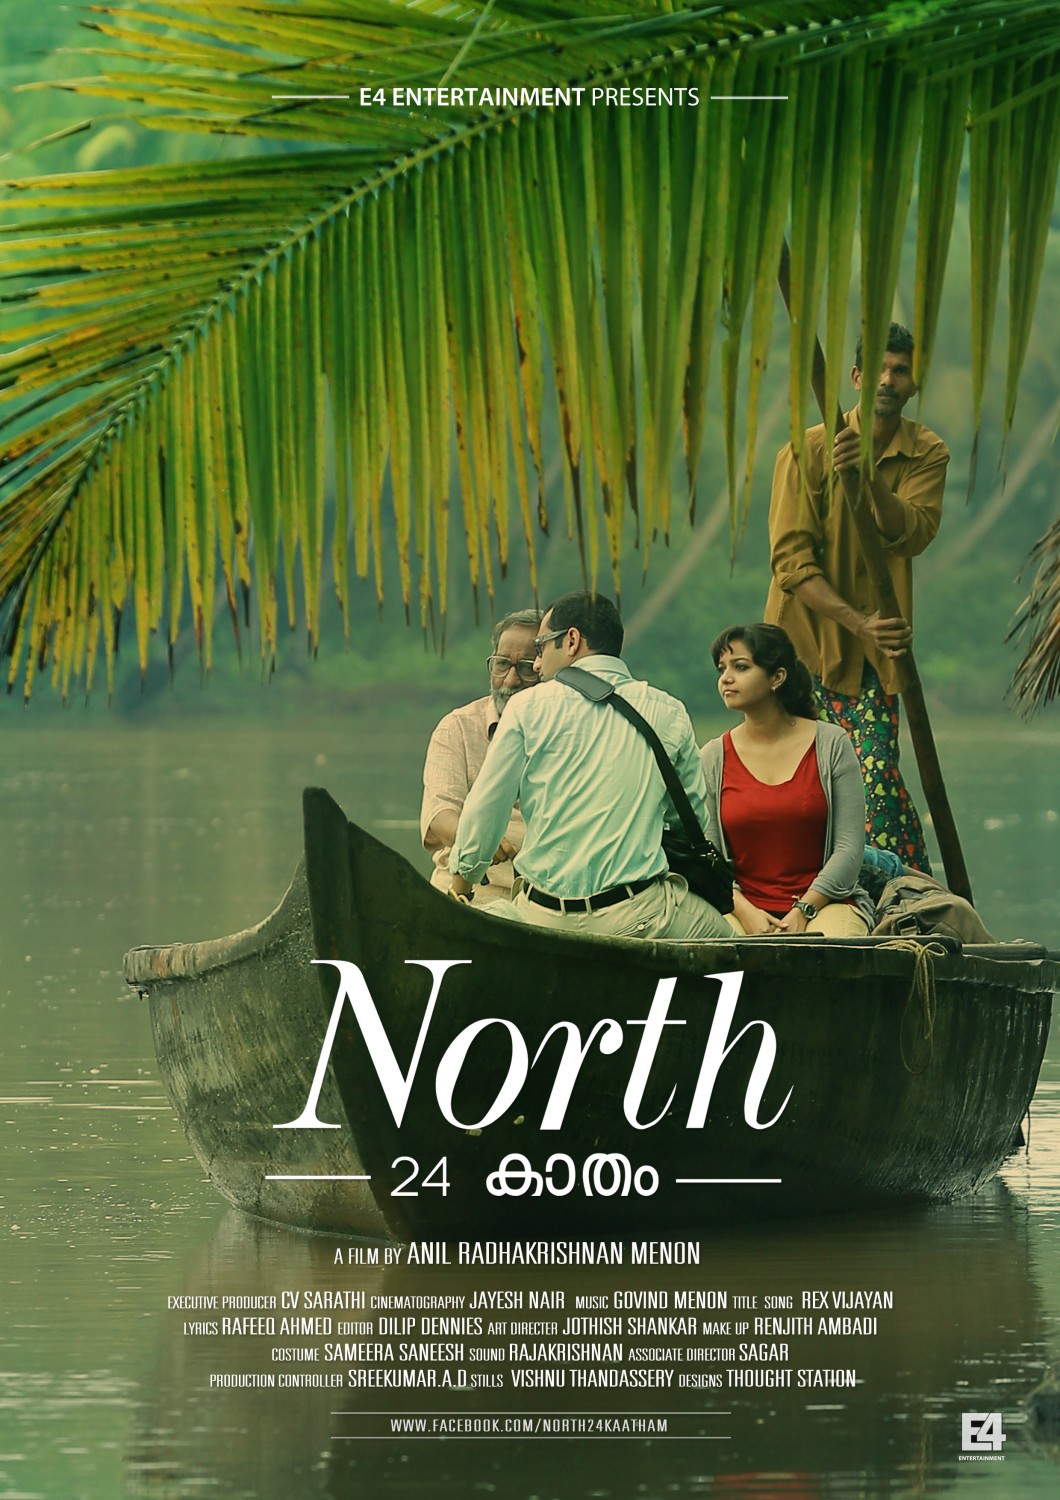 Extra Large Movie Poster Image for North 24 Kaatham (#2 of 5)